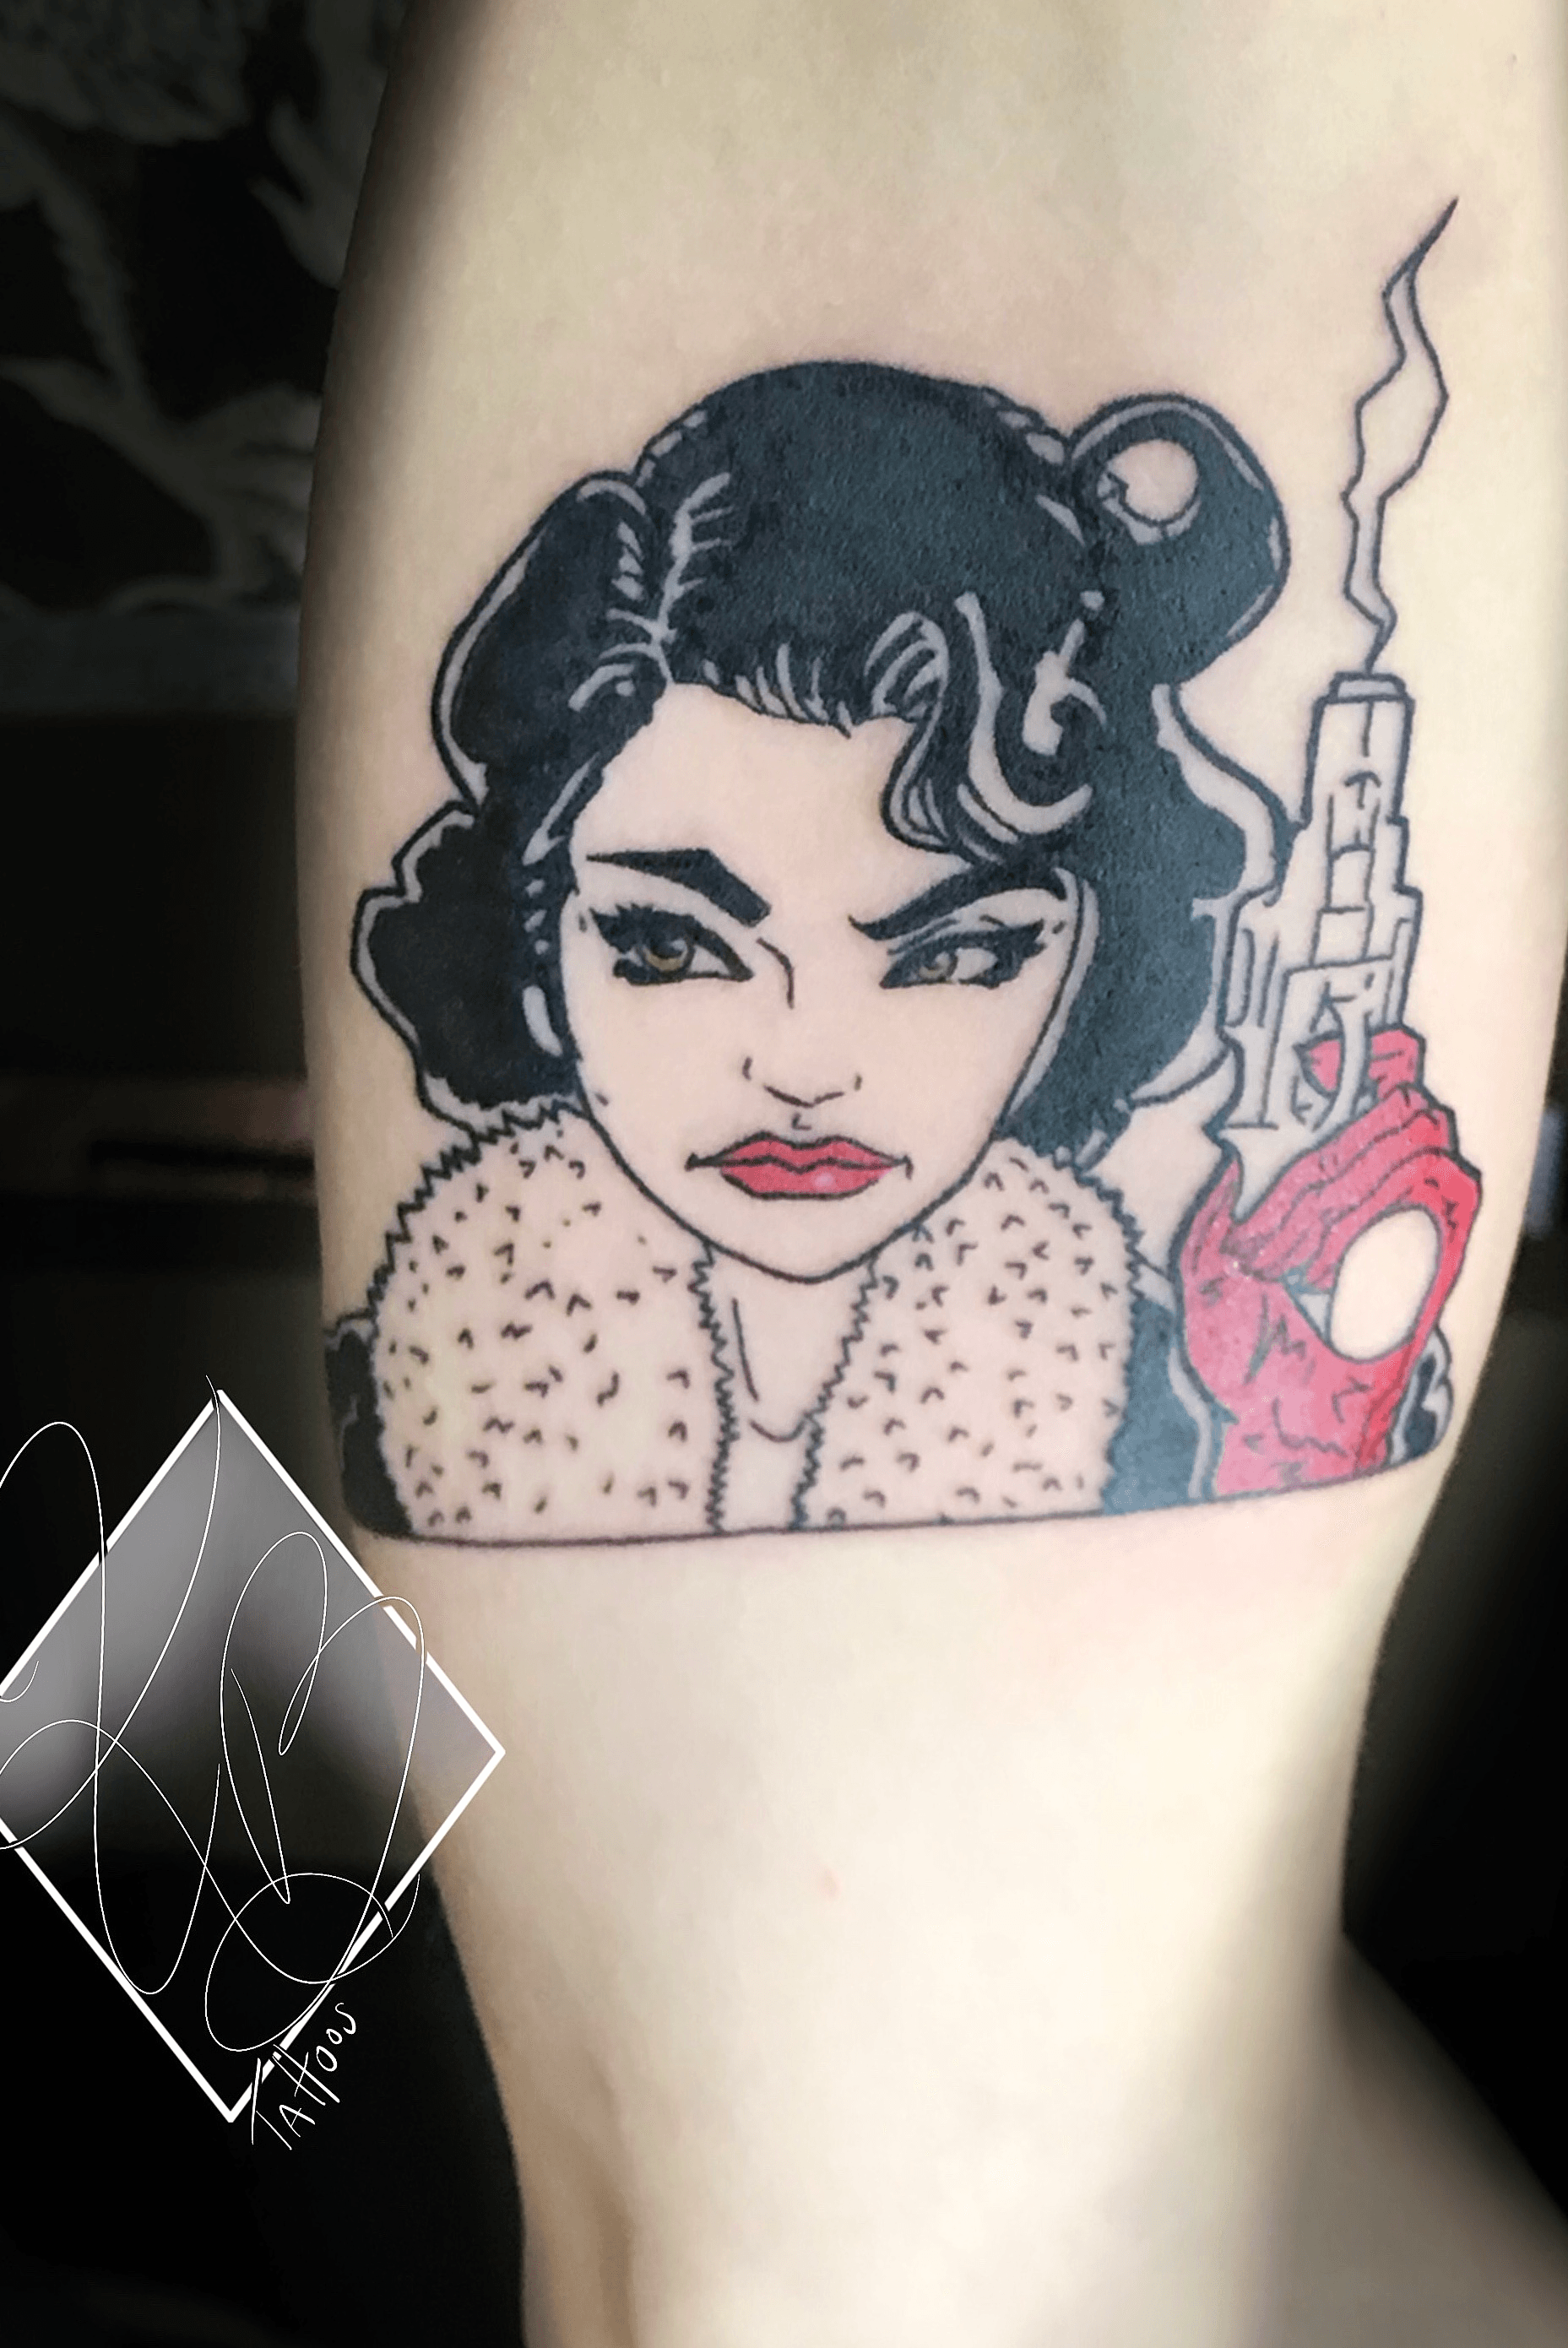 SUZANI on Instagram Done gristletattoo Violet Chachkis face   ink  tattoo seoultattoo sketch drawing creepy   Tattoos Violet chachki  Triangle tattoo